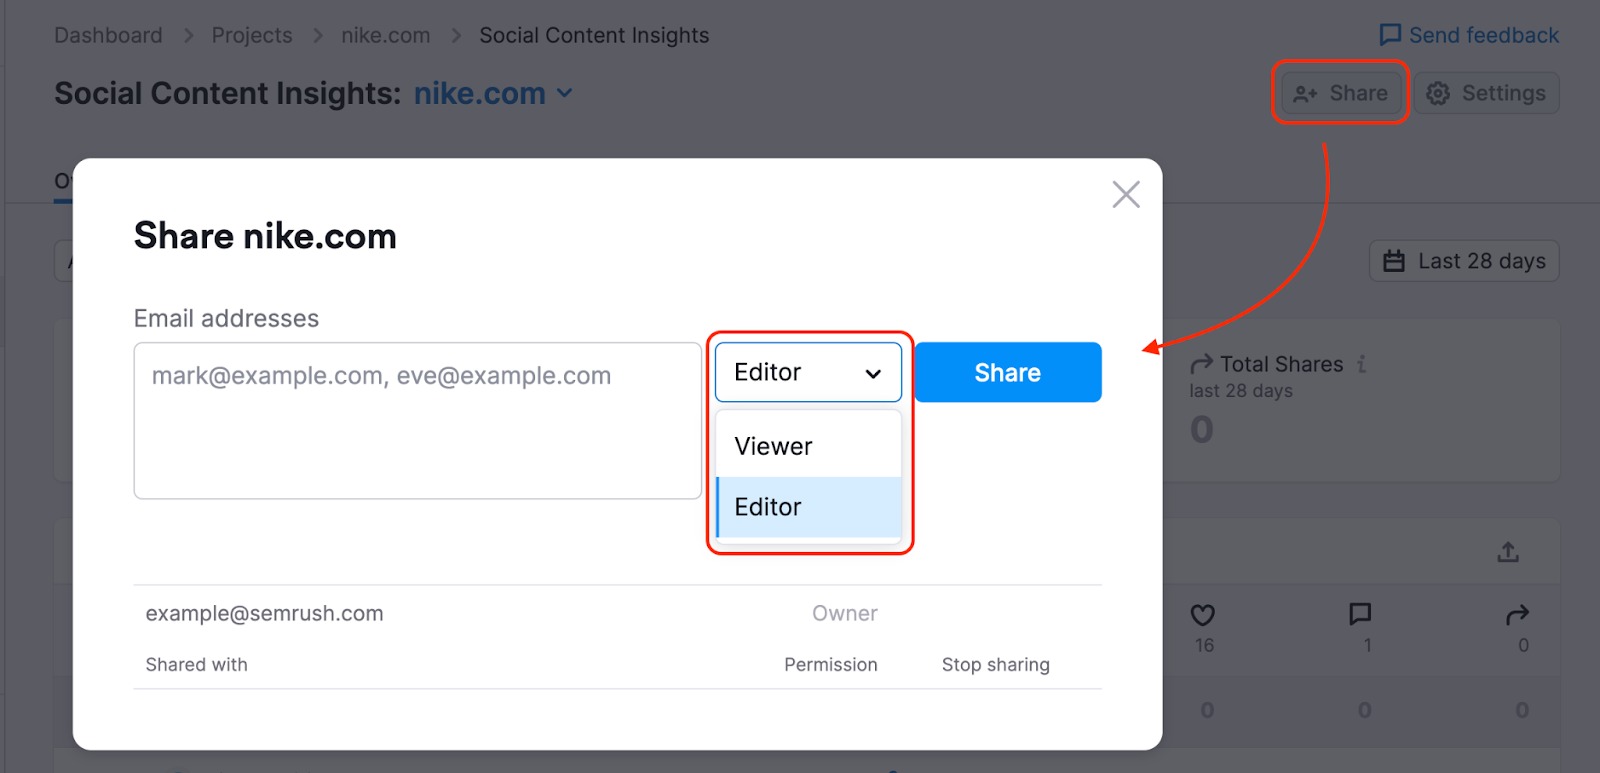 Pop up screen when sharing a project from Social Content Insights that opens after clicking the Share button. The drop down menu shows viewer and editor options. 